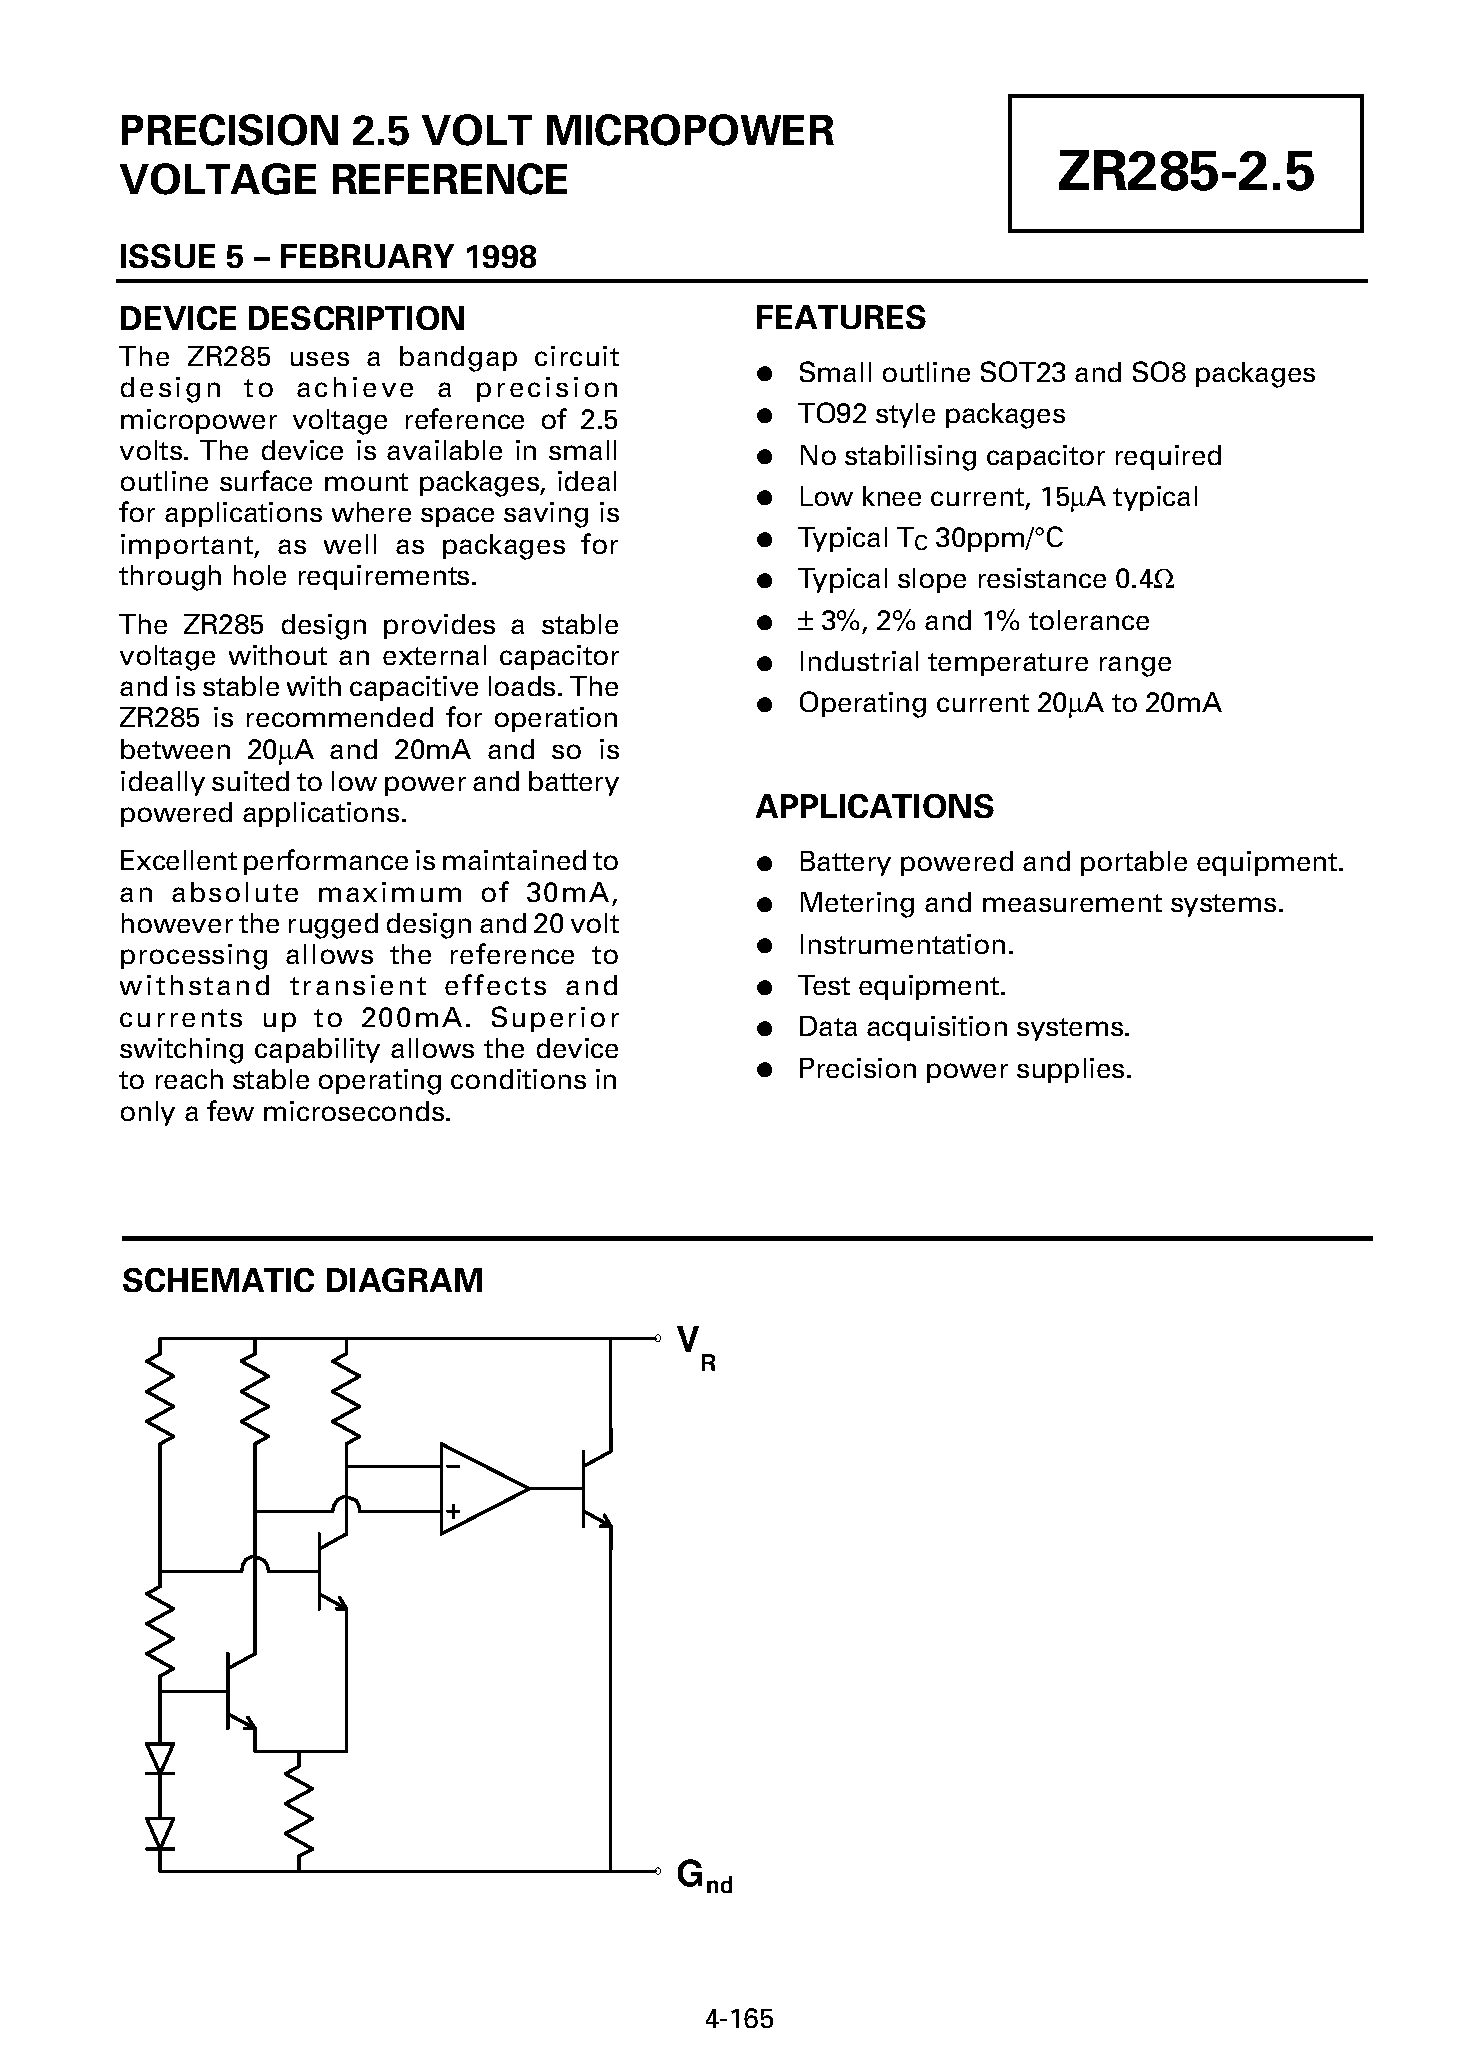 Datasheet ZR285F01 - PRECISION 2.5 VOLT MICROPOWER VOLTAGE REFERENCE page 1